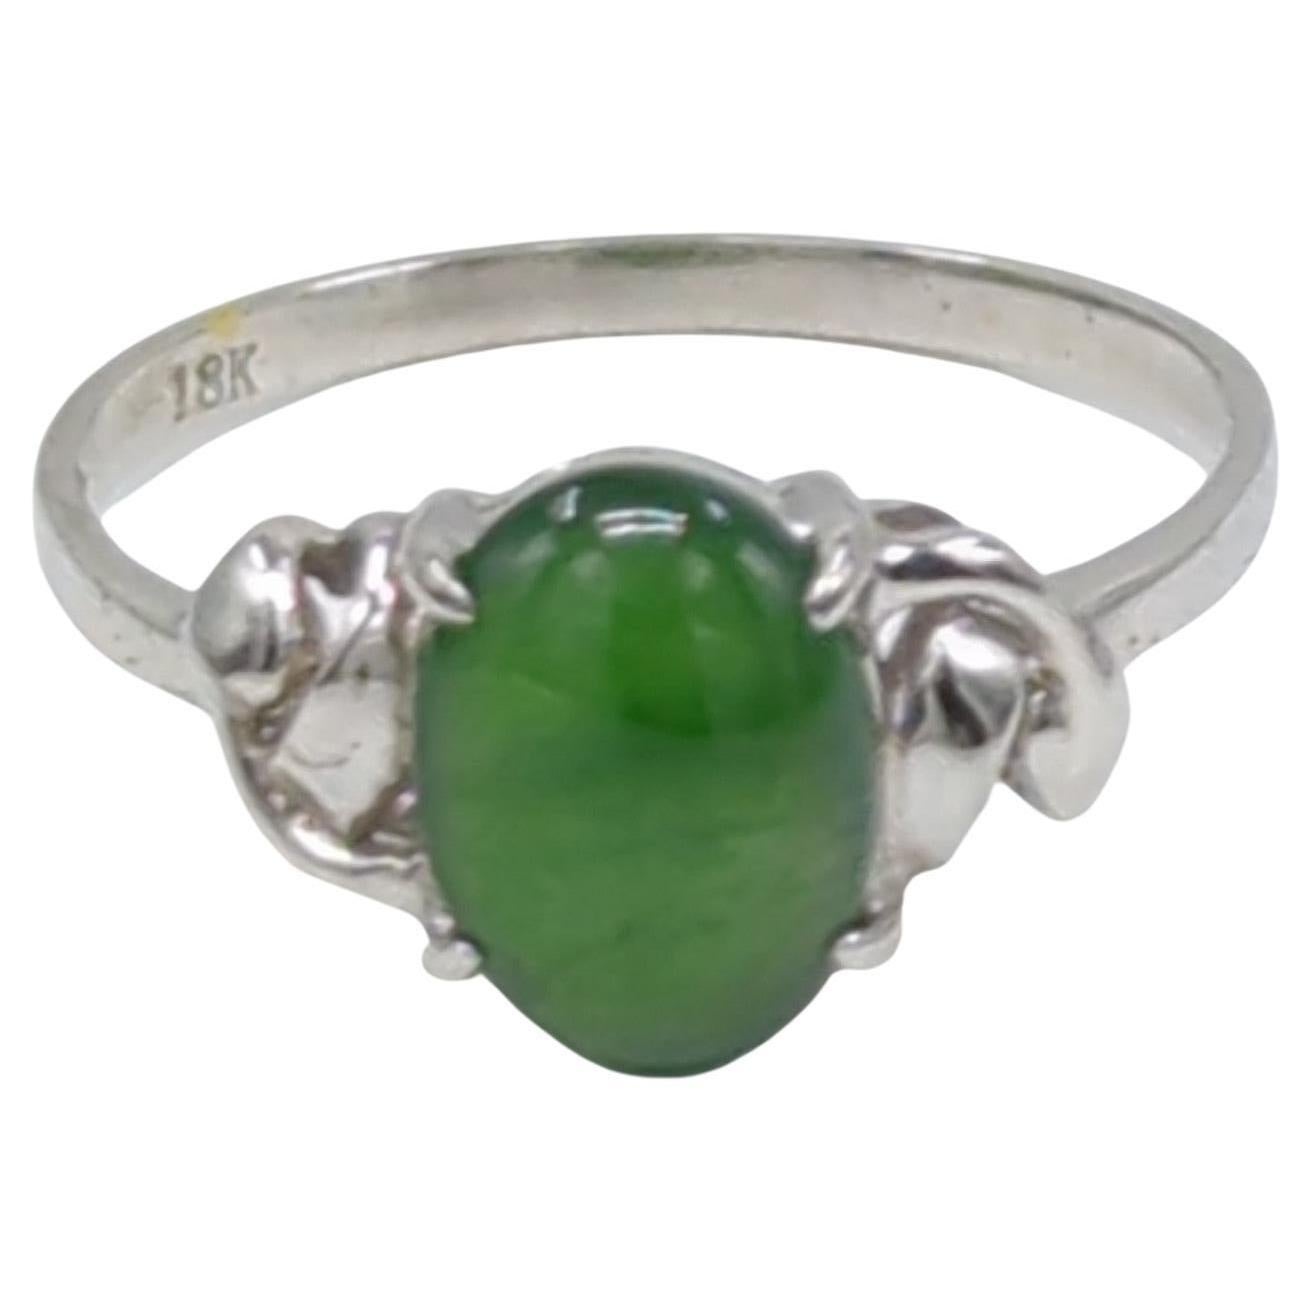 18K White Gold Translucent Deep Green Cabochon Jadeite Ring A-Grade Size 6 For Sale 7